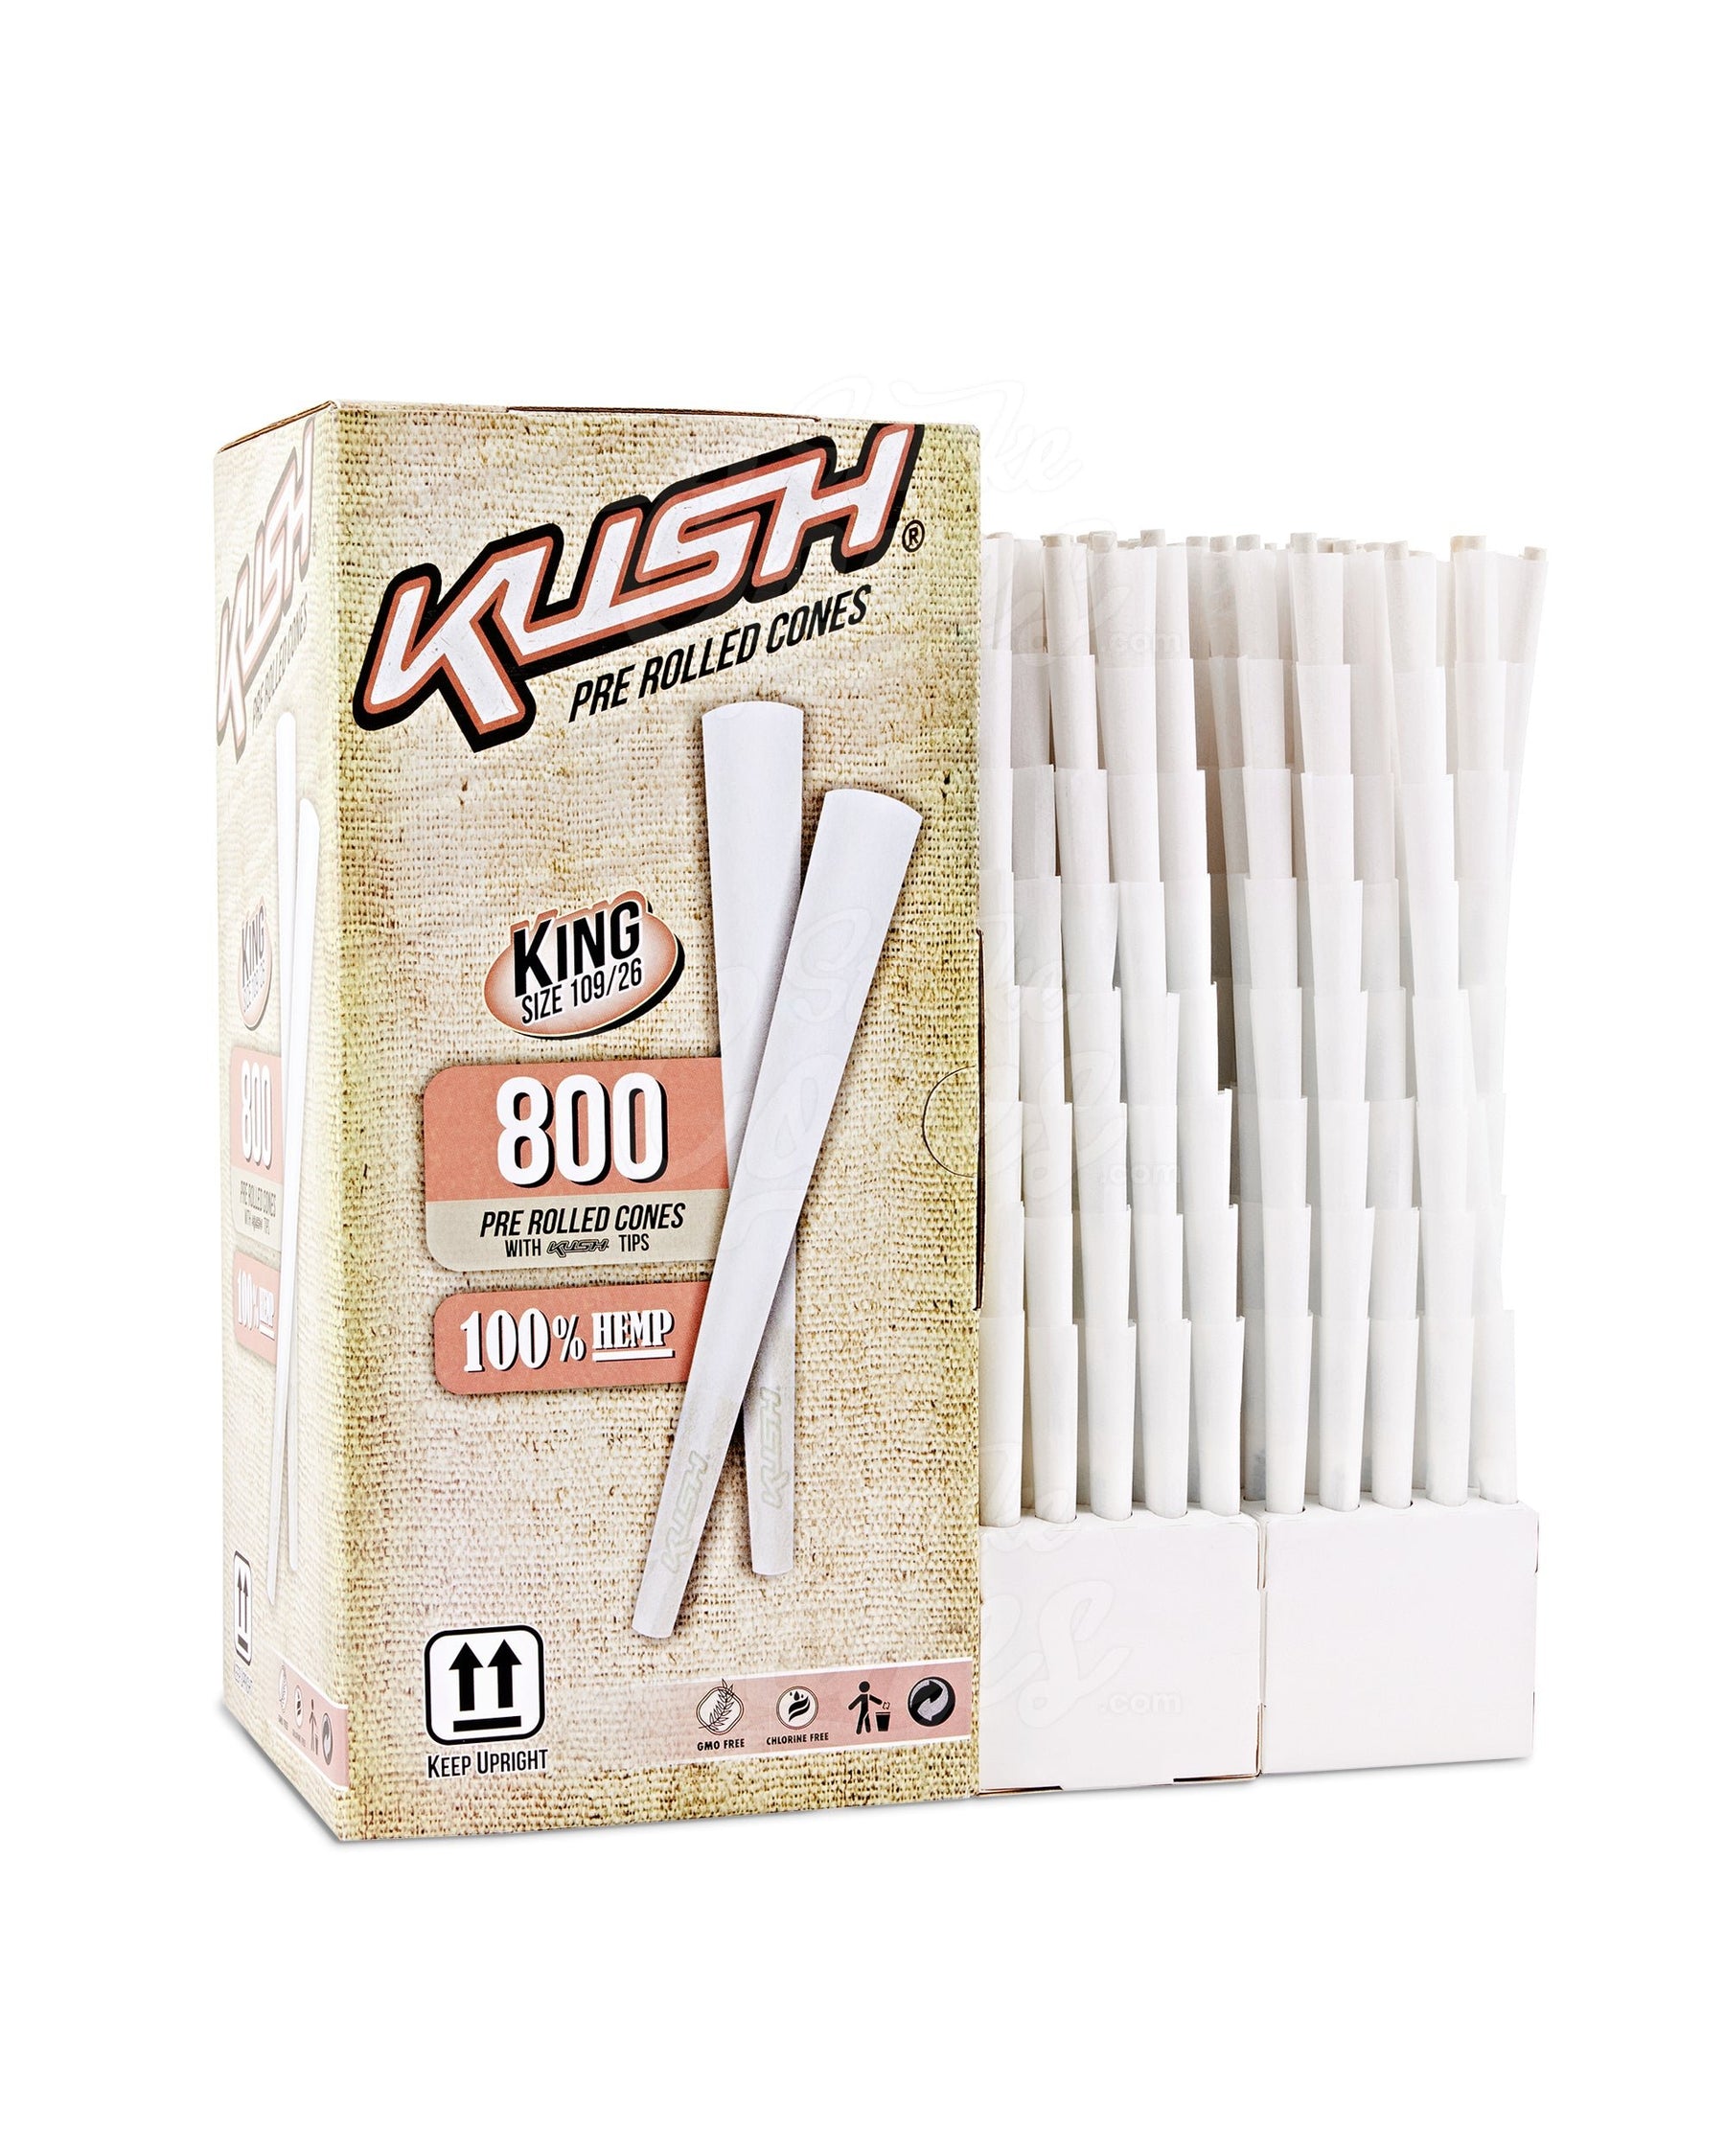 Kush 109mm King Size Bleached Pre Rolled Cones w/ Filter Tip 800/Box - 2